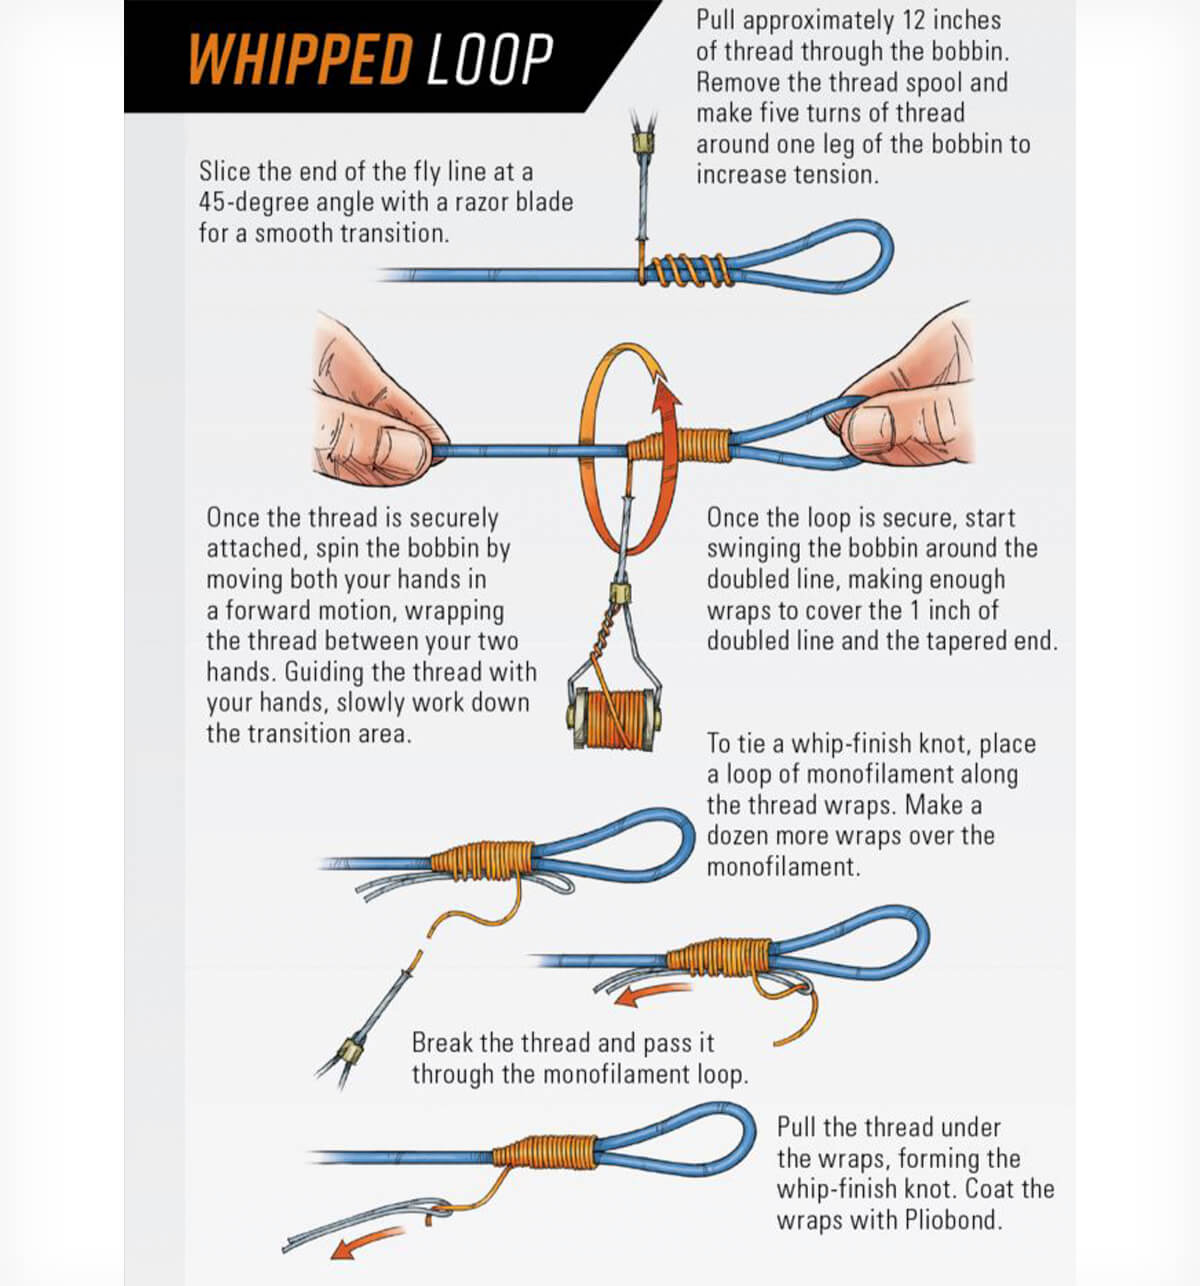 Best Fly Fishing Knots You Should Know - Fly Fisherman